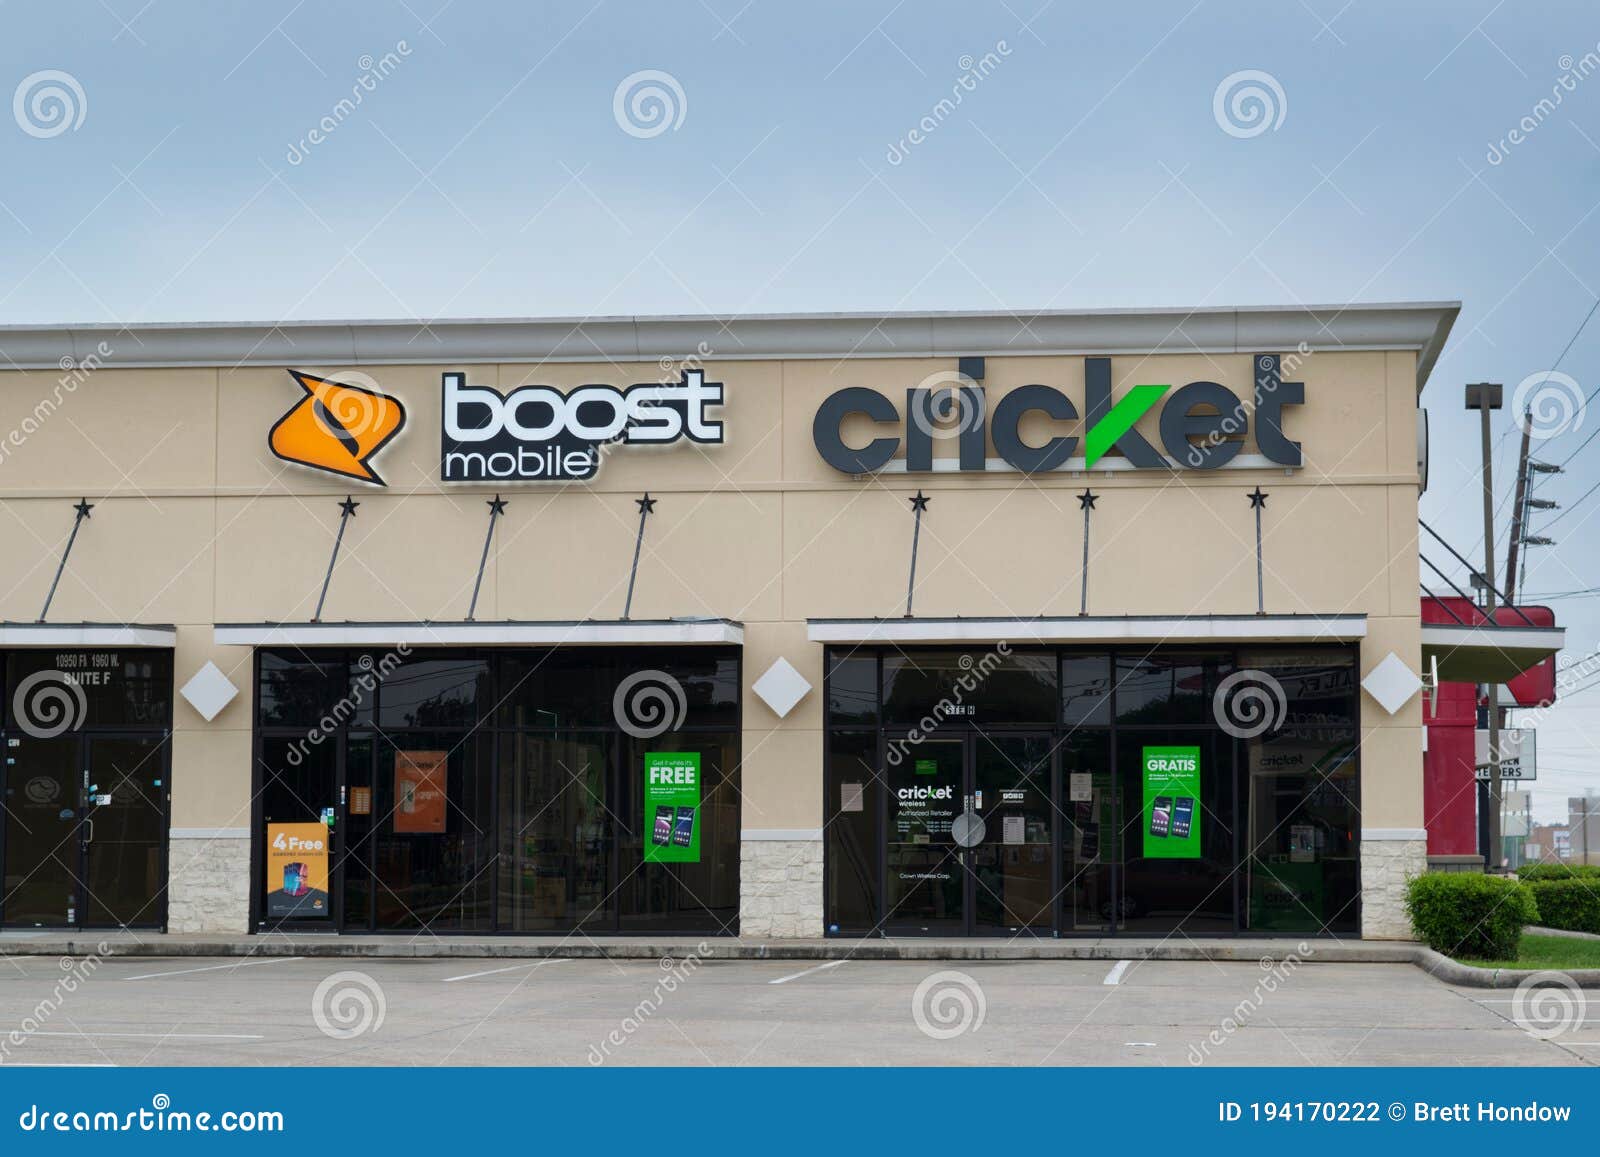 Cricket Store and Boost Mobile Sign in Houston, TX